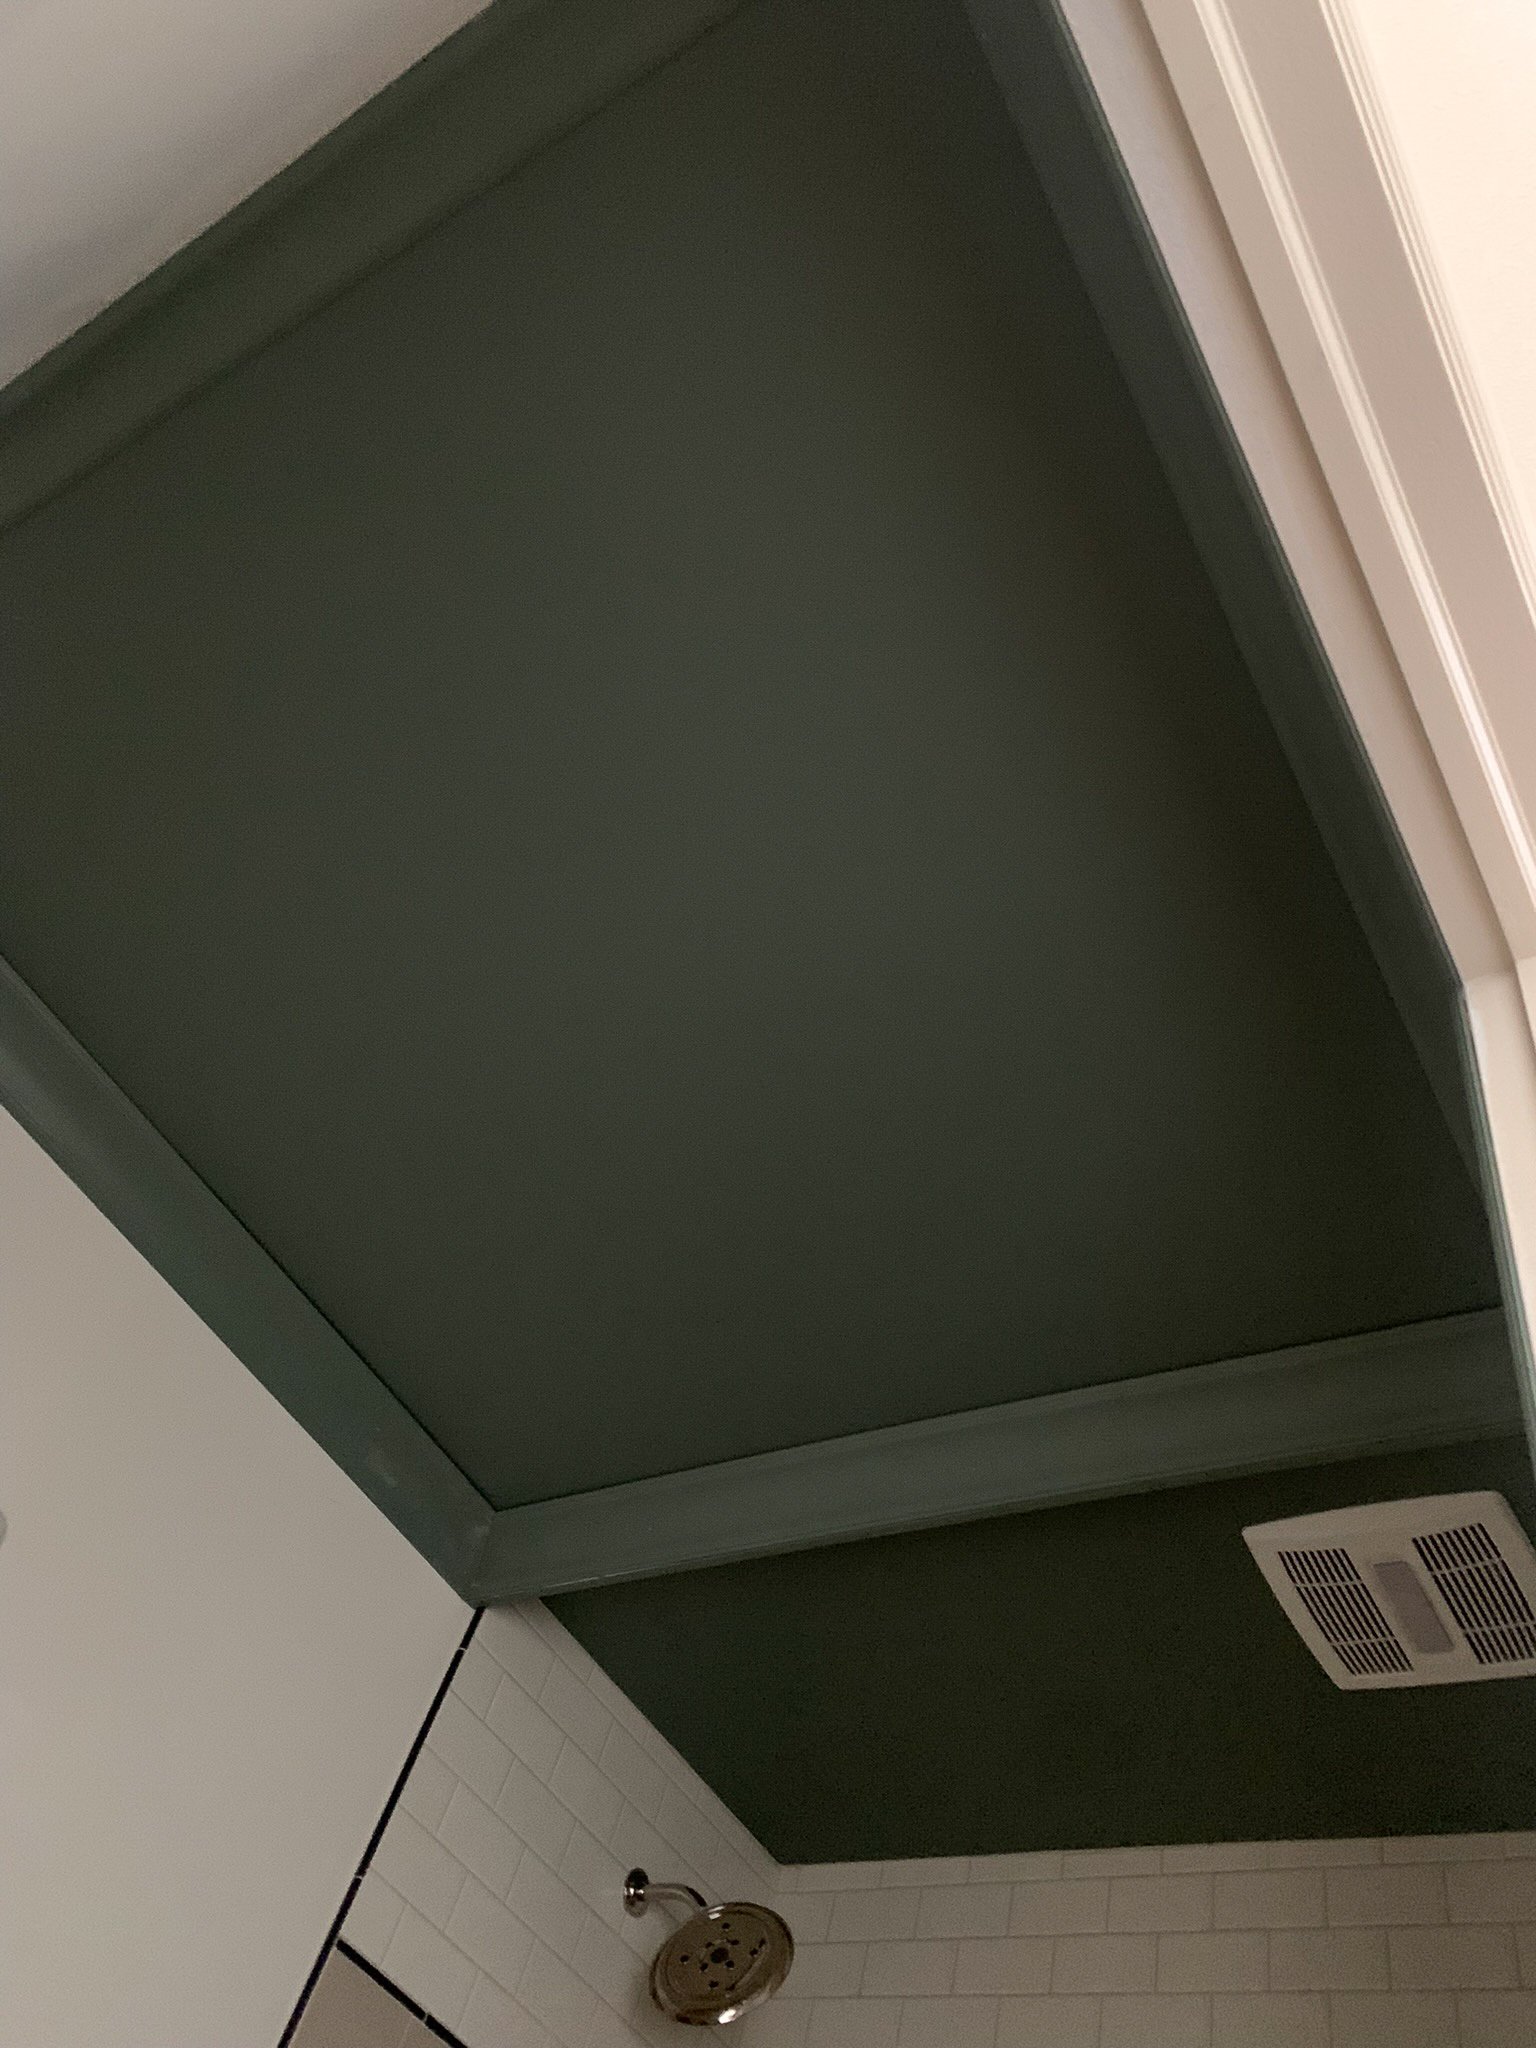 green ceiling with crown moulding where the crown moulding is installed in front of a shower